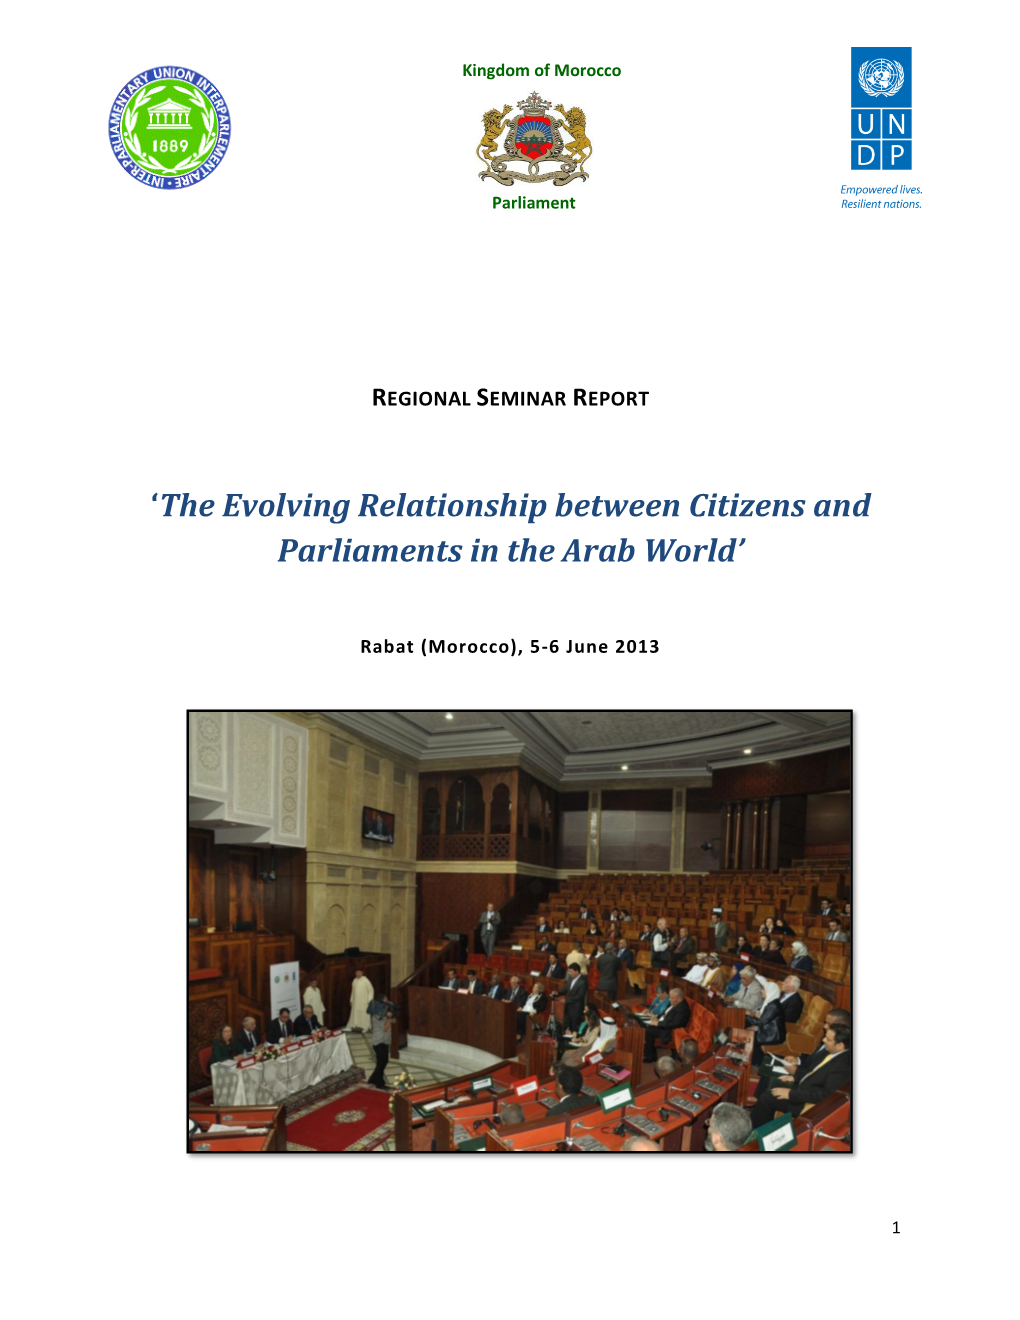 The Evolving Relationship Between Citizens and Parliaments in the Arab World’